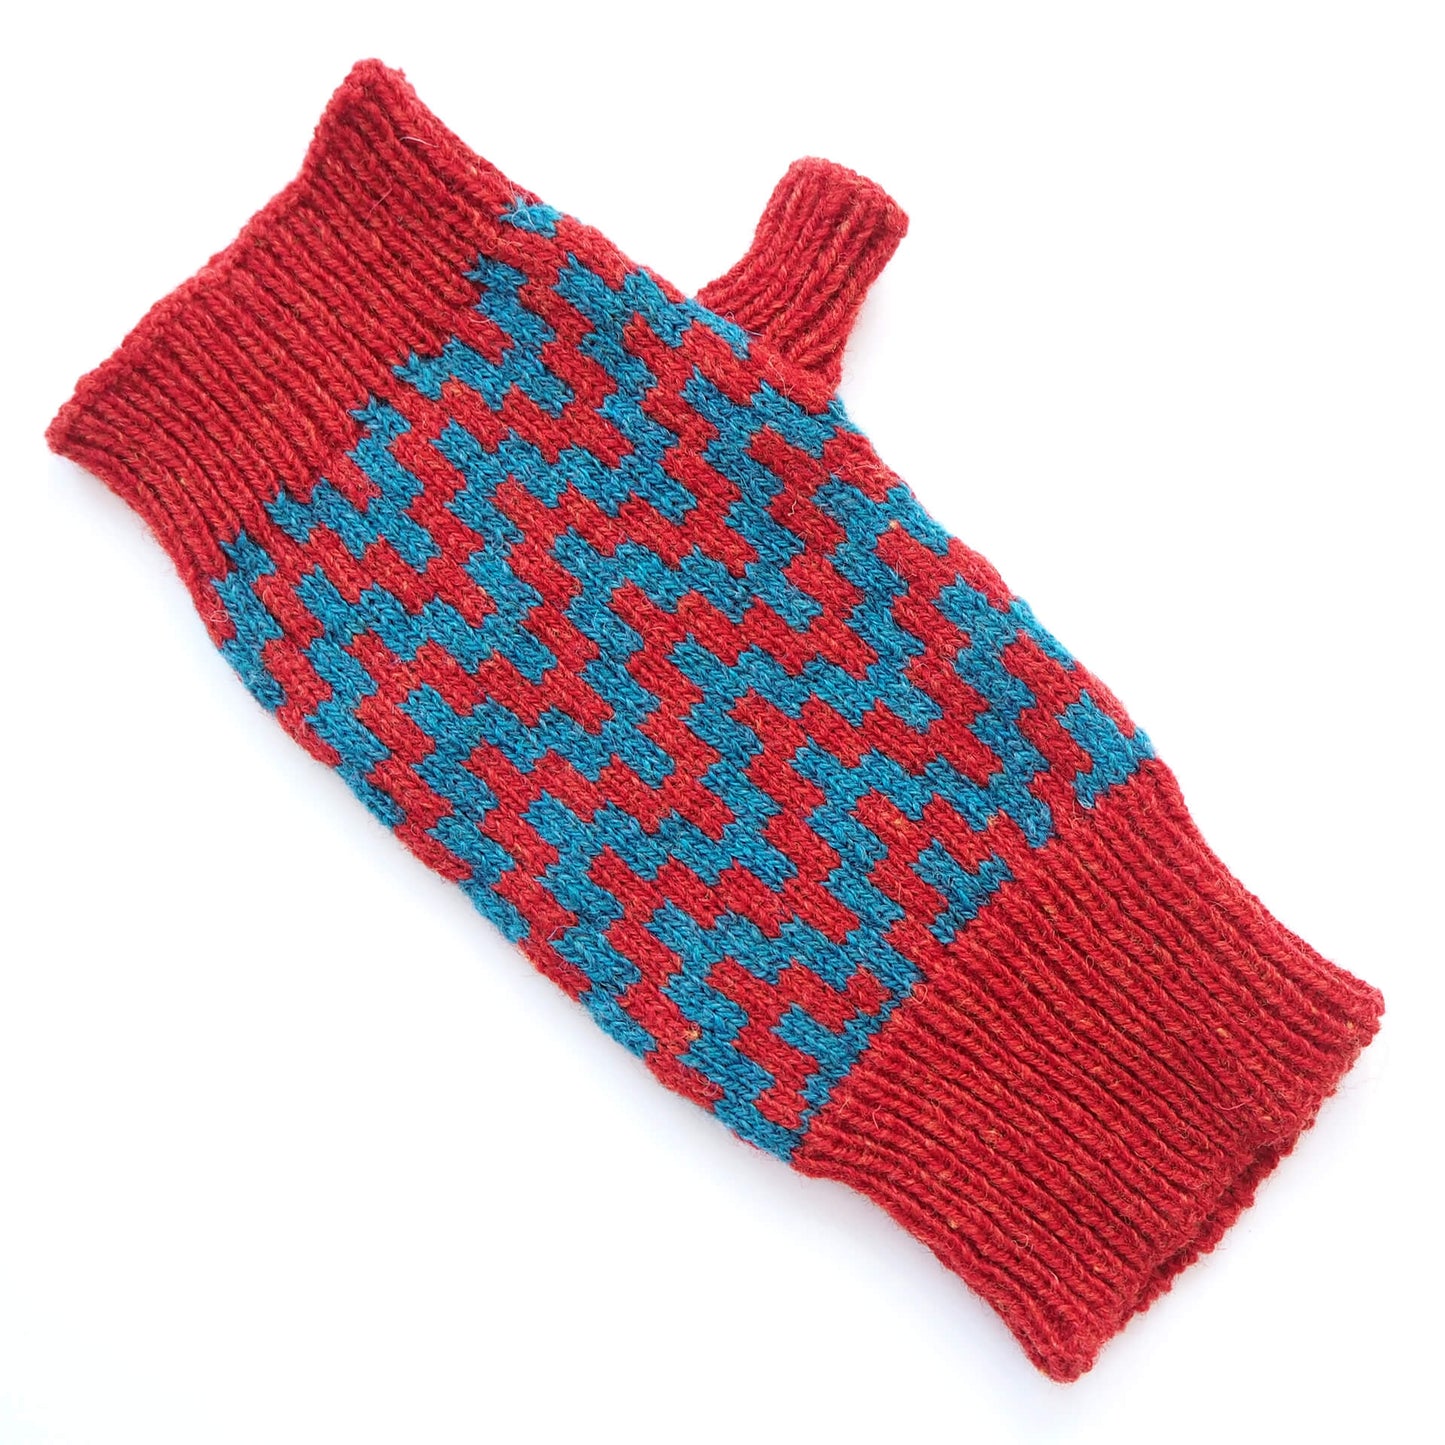 A fingerless glove by K.Moods, it is red with a thick blue zig-zag pattern, and sits on a white background. 